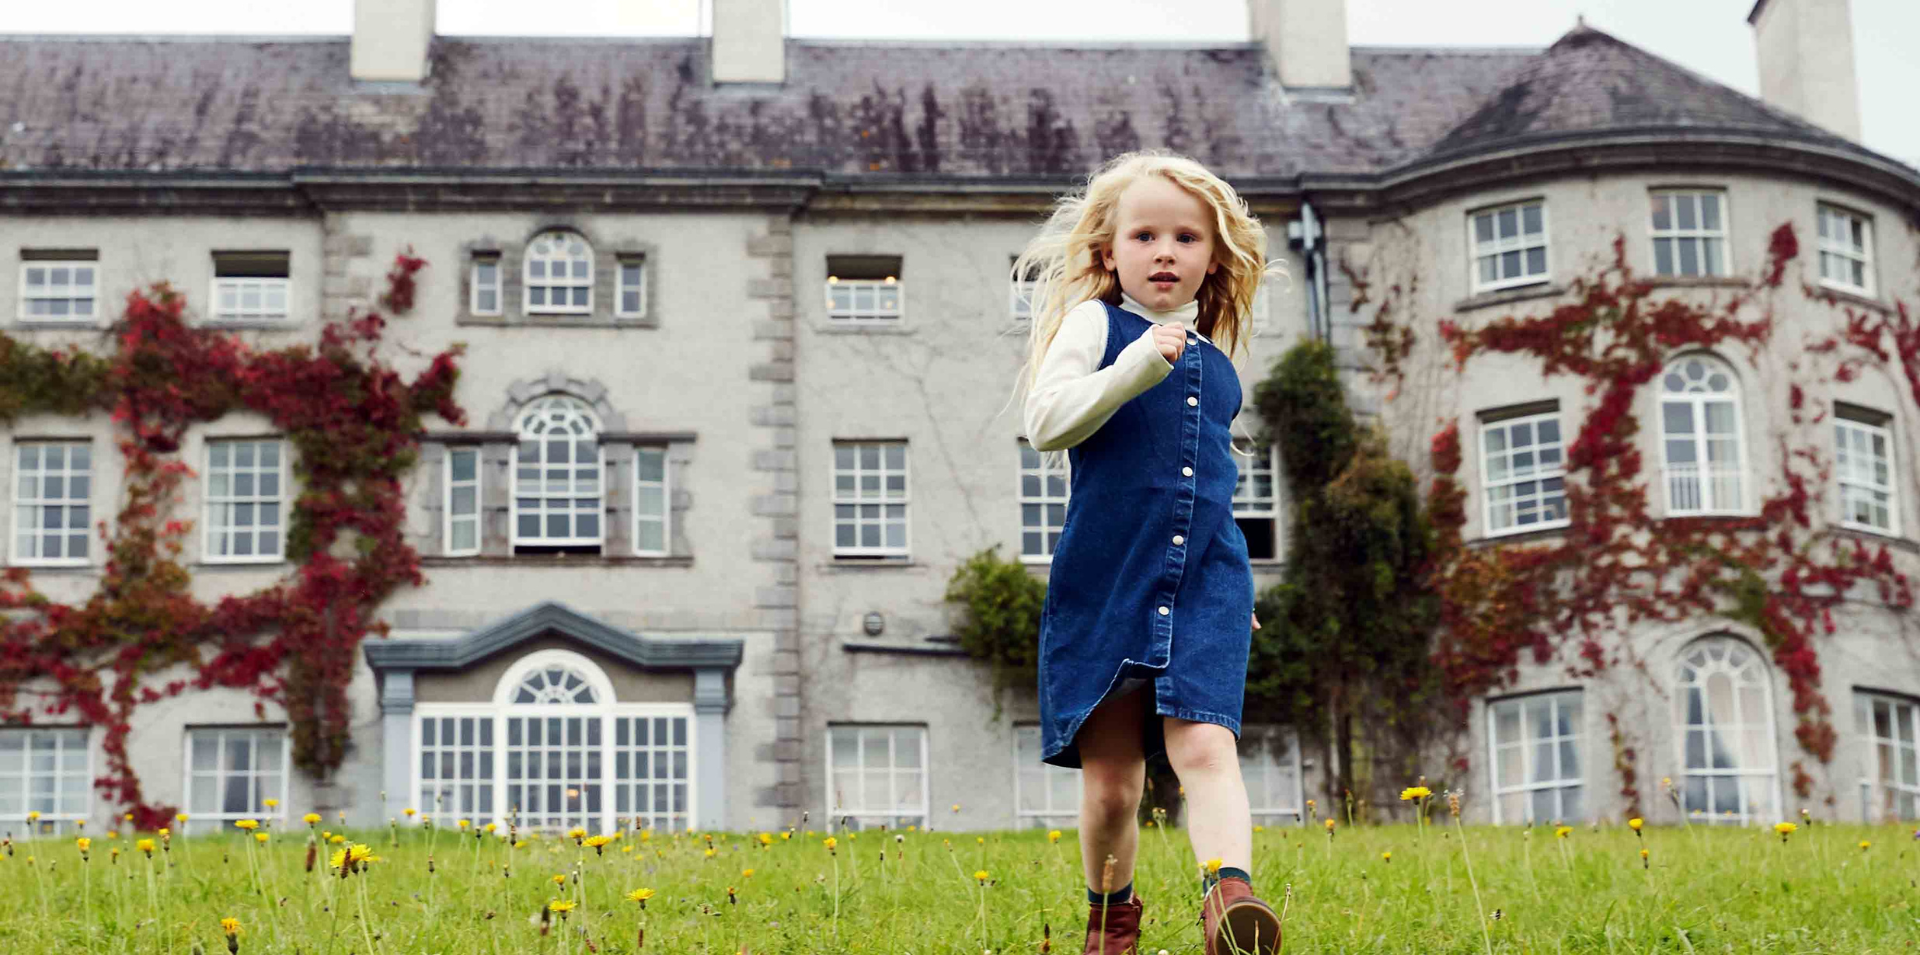 3 Night Halloween Family Break – with Dinner on One Night and Access to Junior Club (including kids meals) – From €279 per night